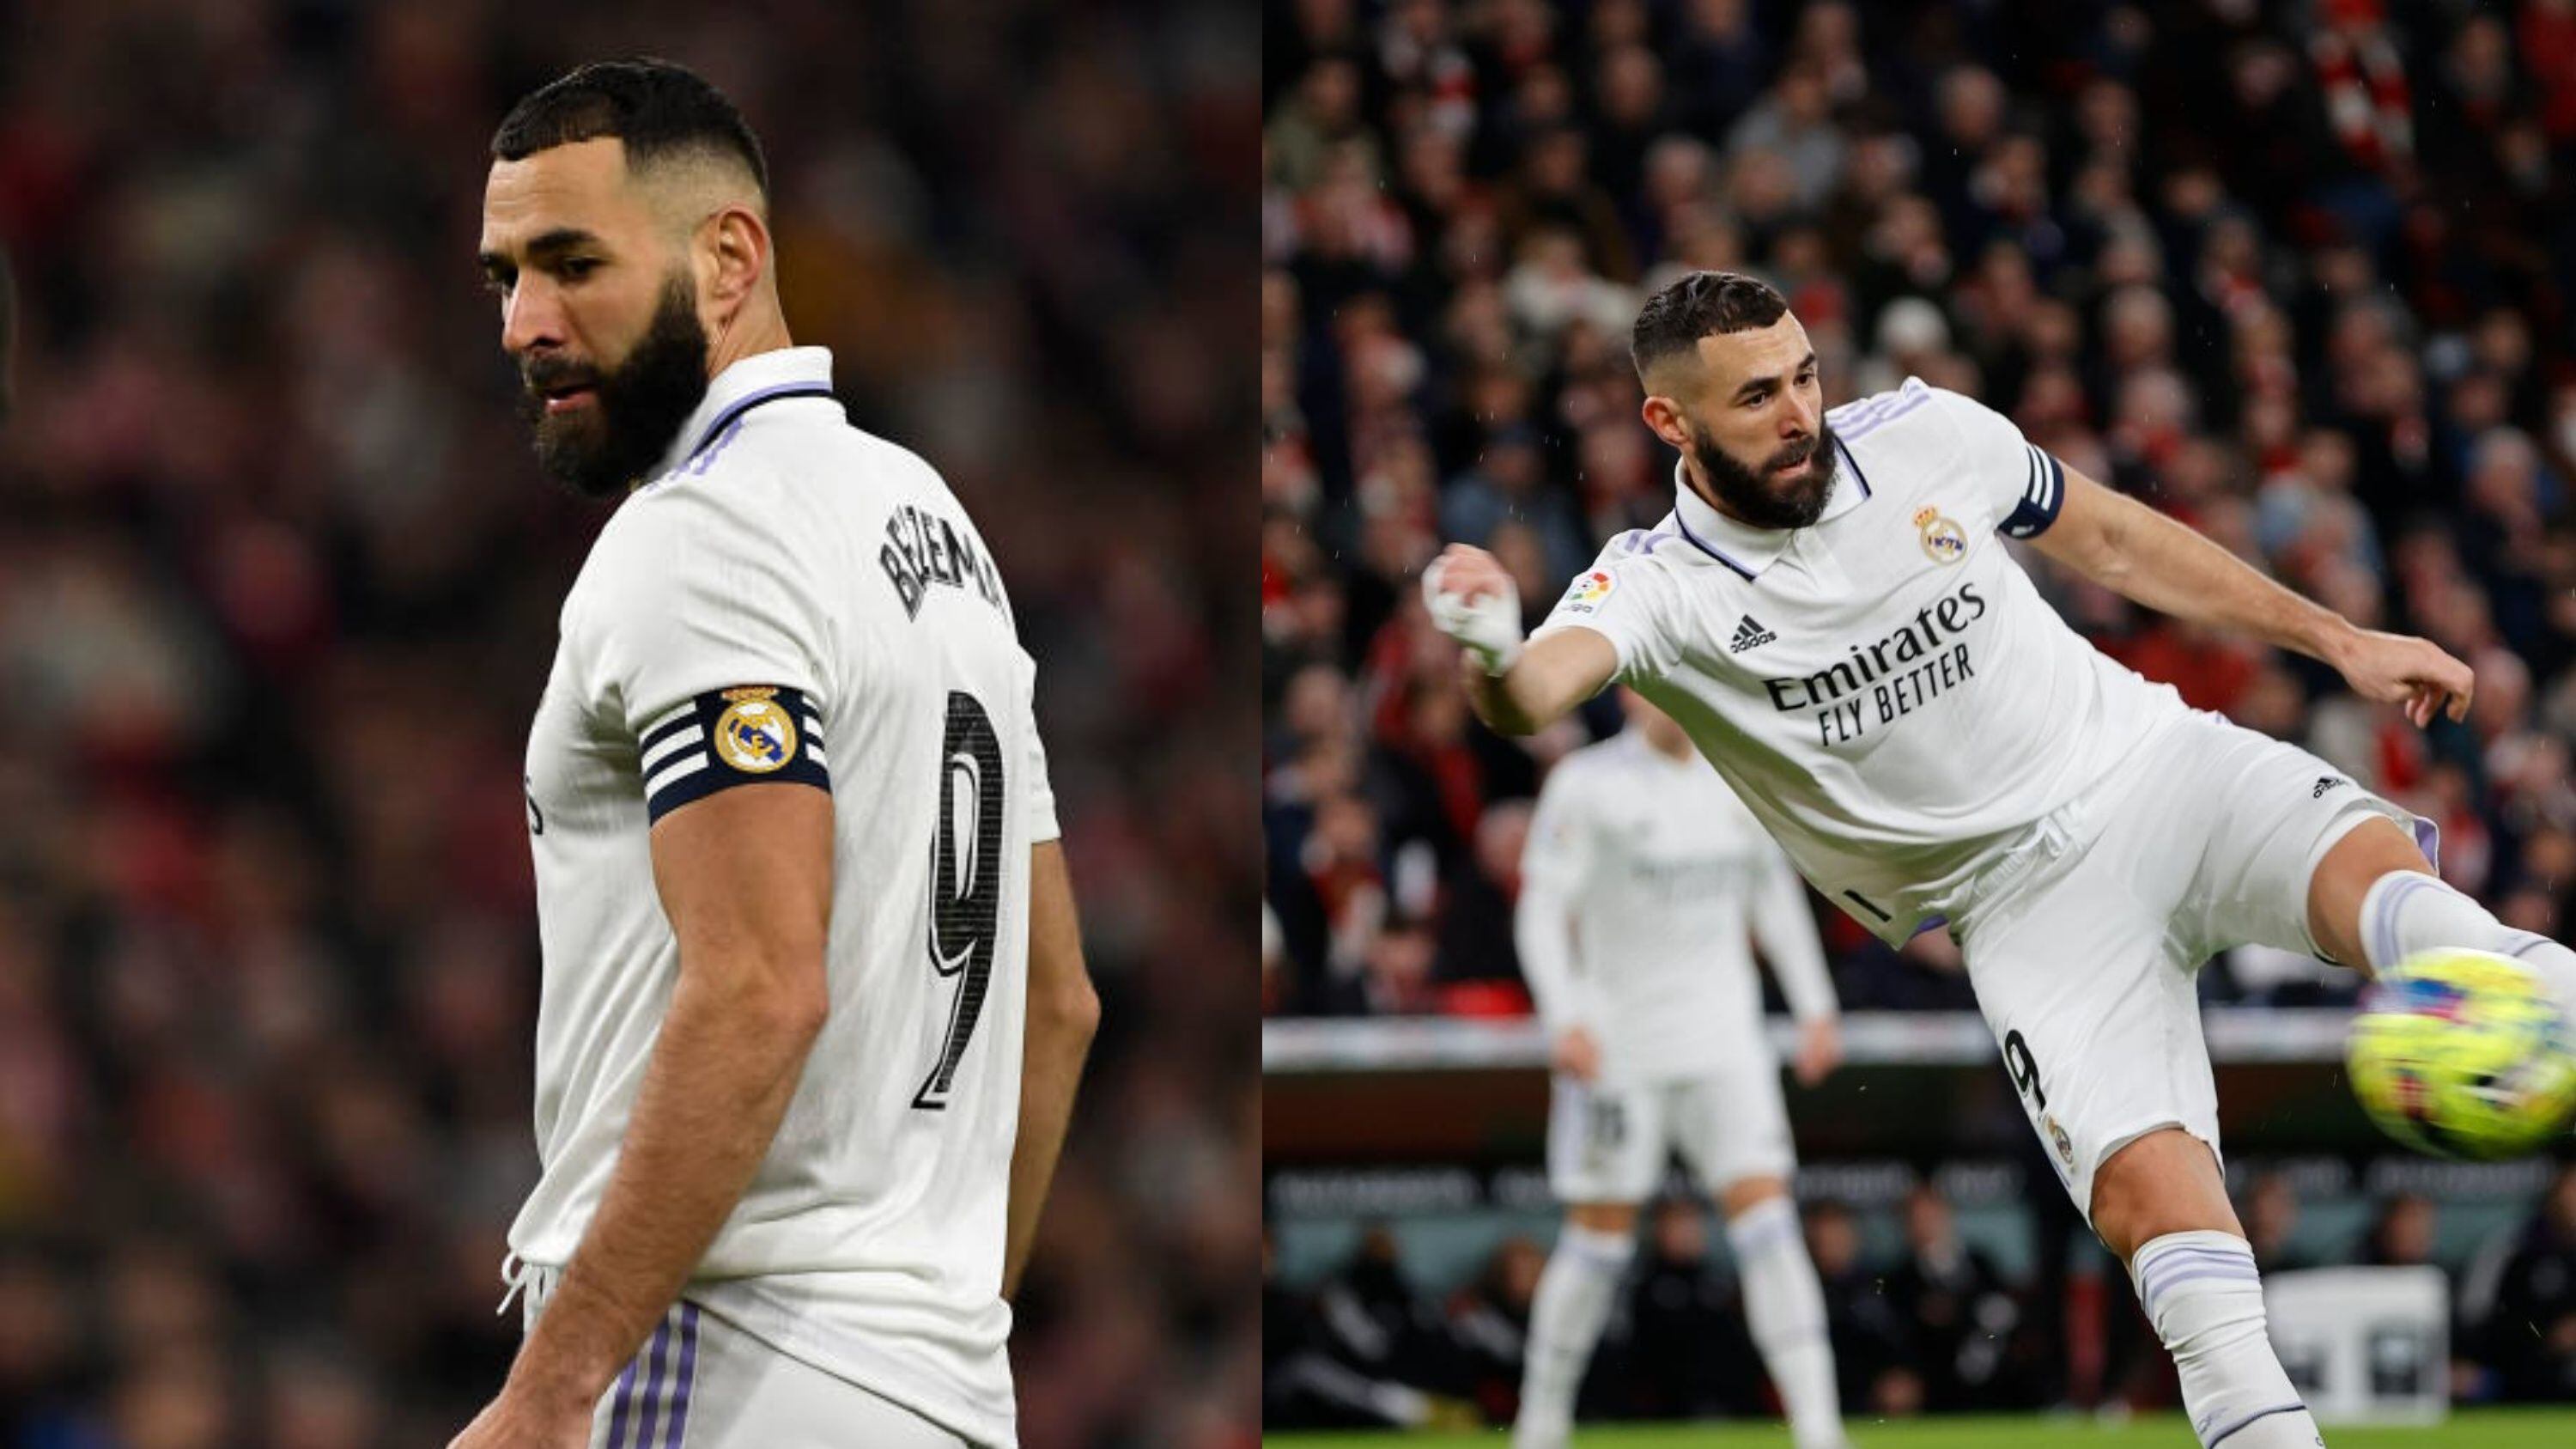 After rumors of his departure to Arabia, this is how Benzema responded with Real Madrid against Athletic Club